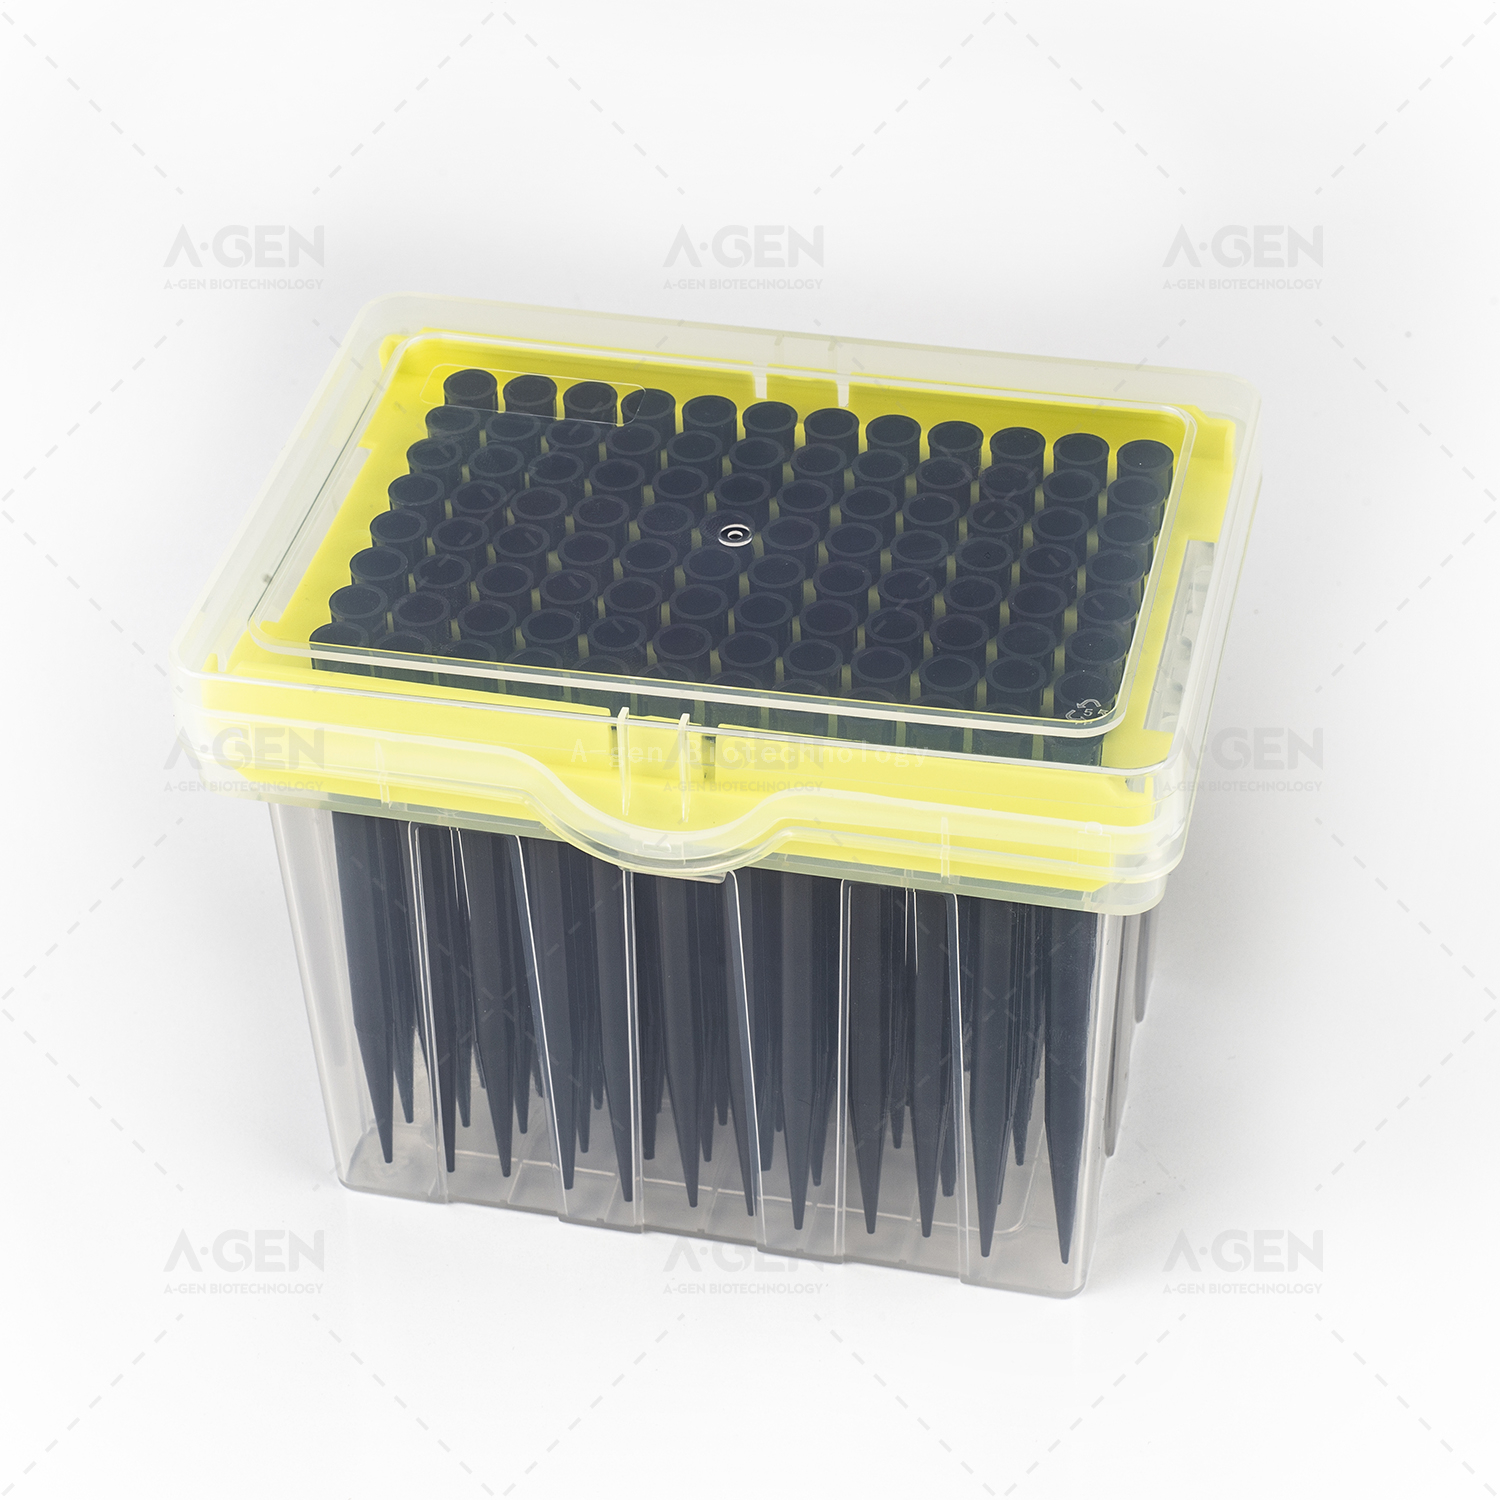 Tecan LiHa Conductive 1000μL PP Pipette Tip (Racked,sterilized) No Filter TT-1000C-RS DNA/RNA Free